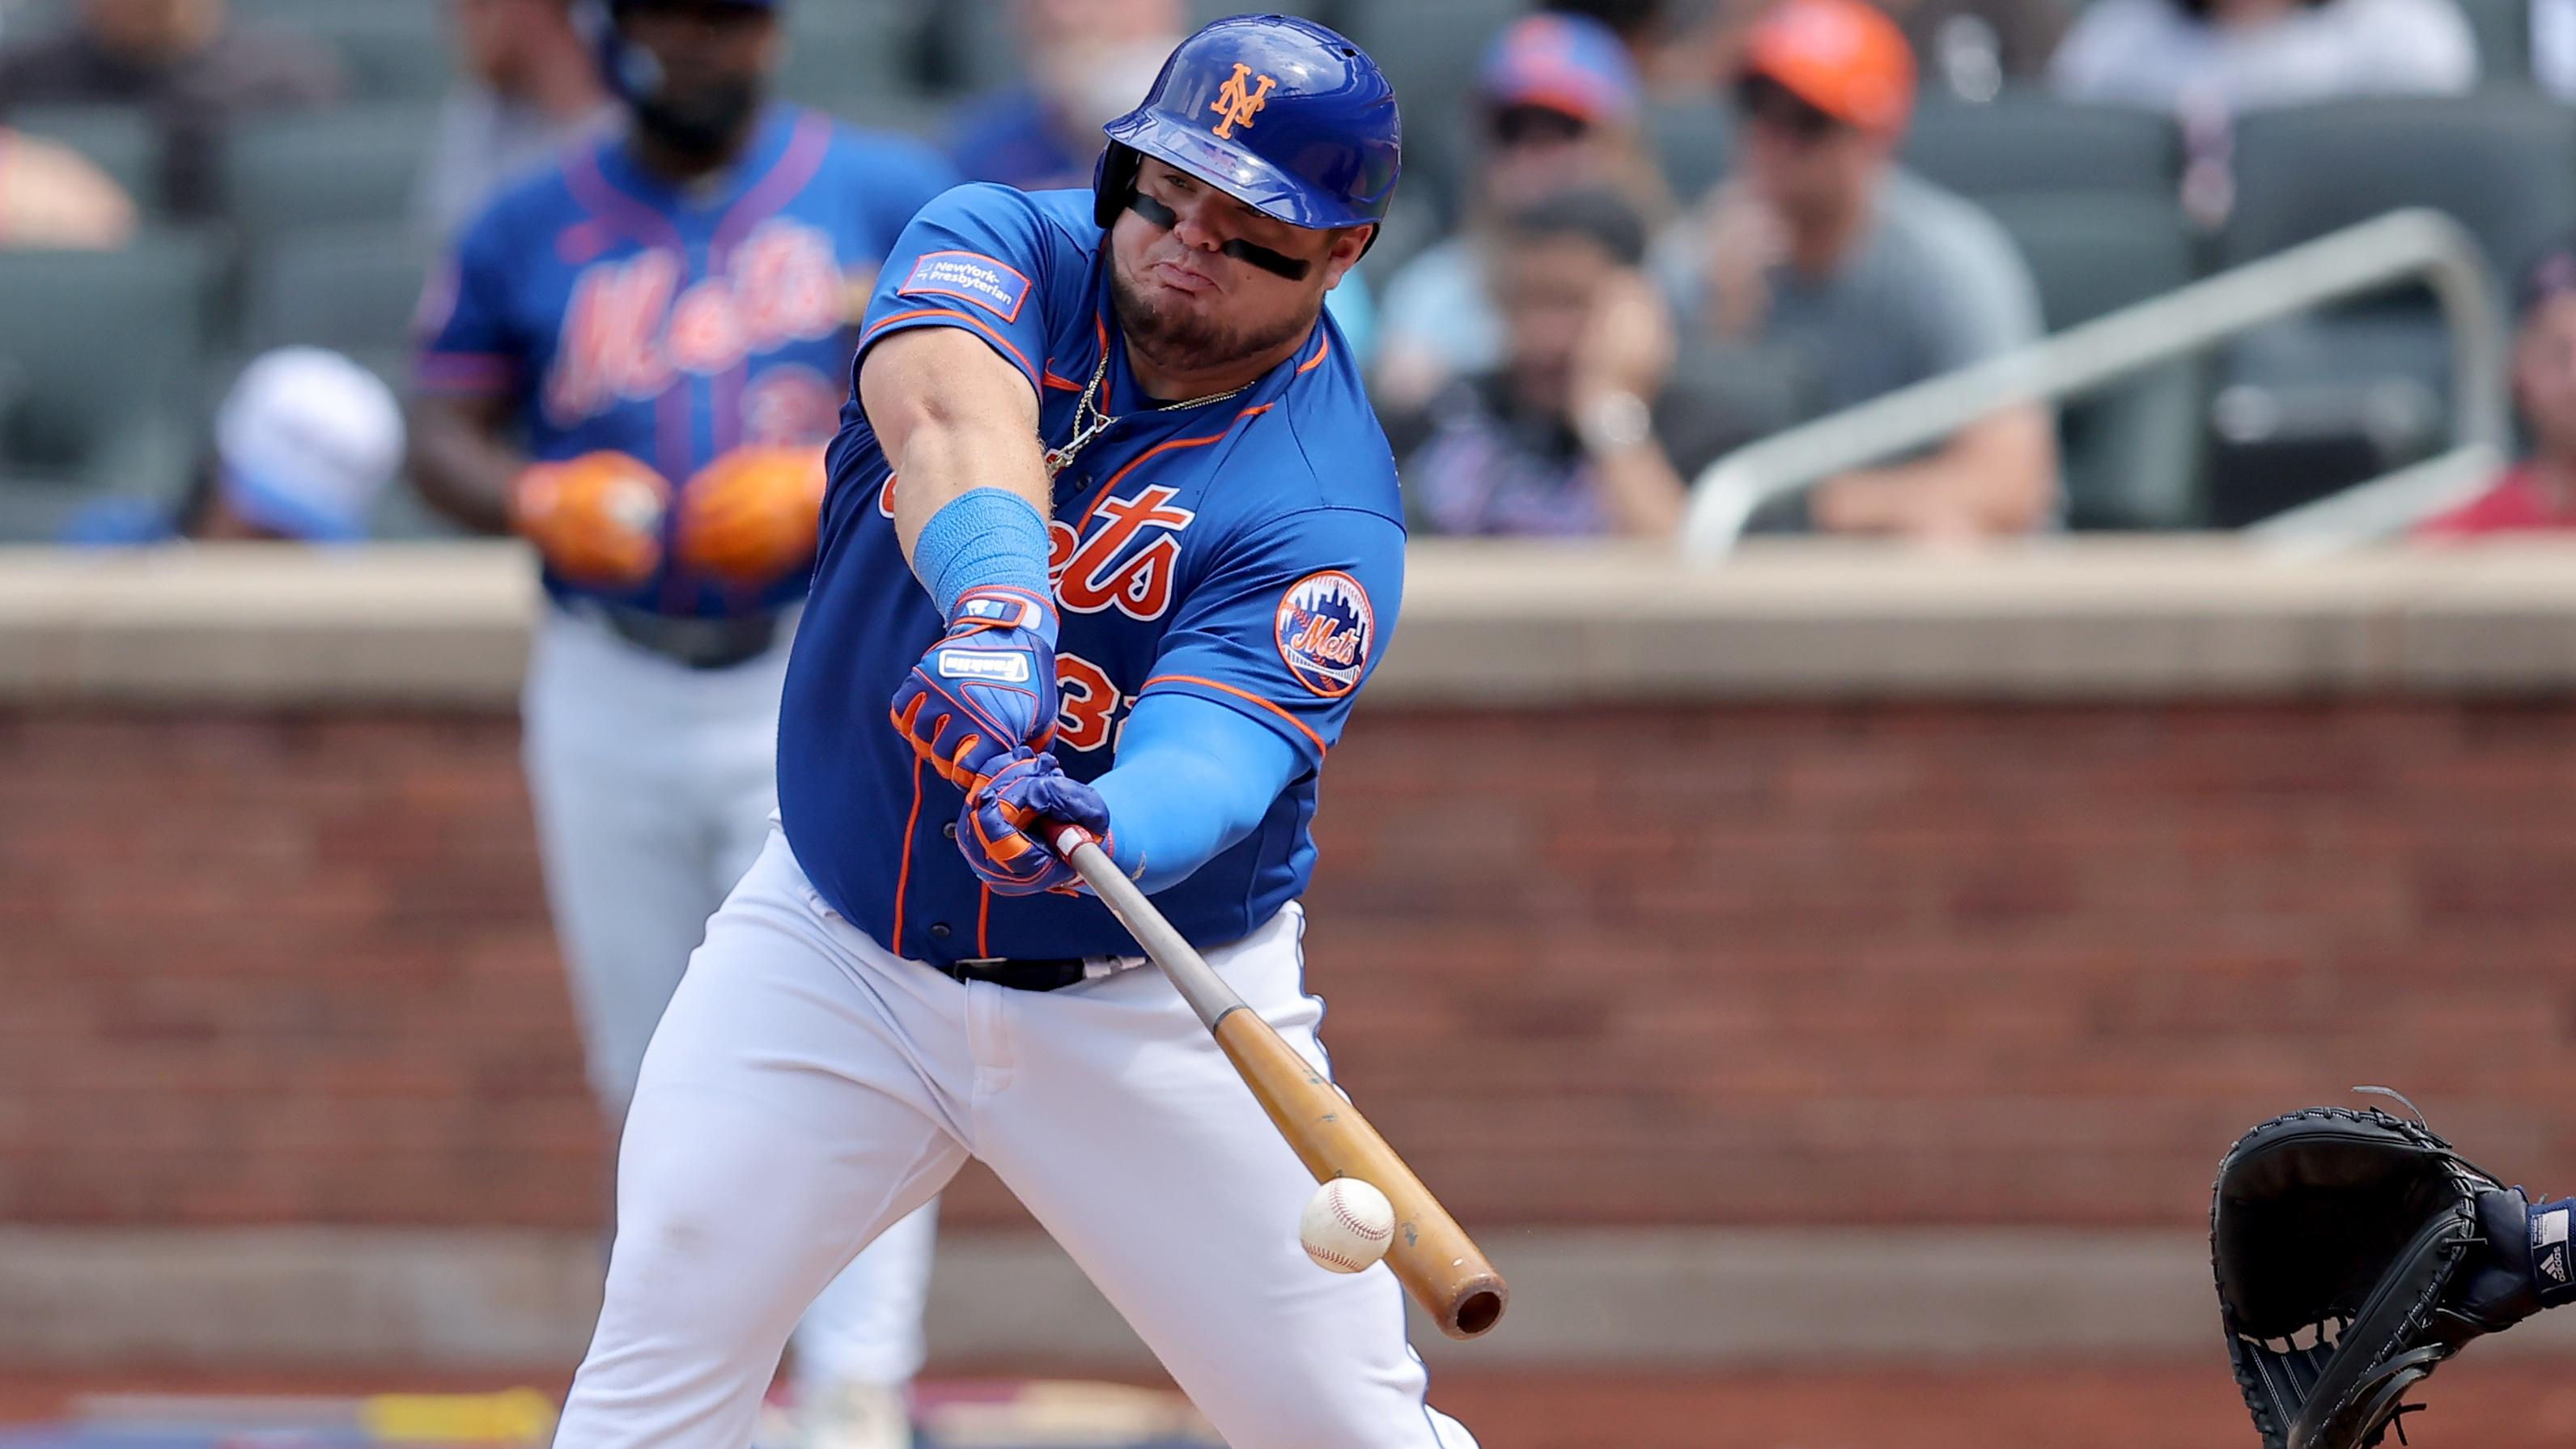 New York Mets designated hitter Daniel Vogelbach (32) hits a single against the Atlanta Braves during the fourth inning at Citi Field / Brad Penner - USA TODAY Sports